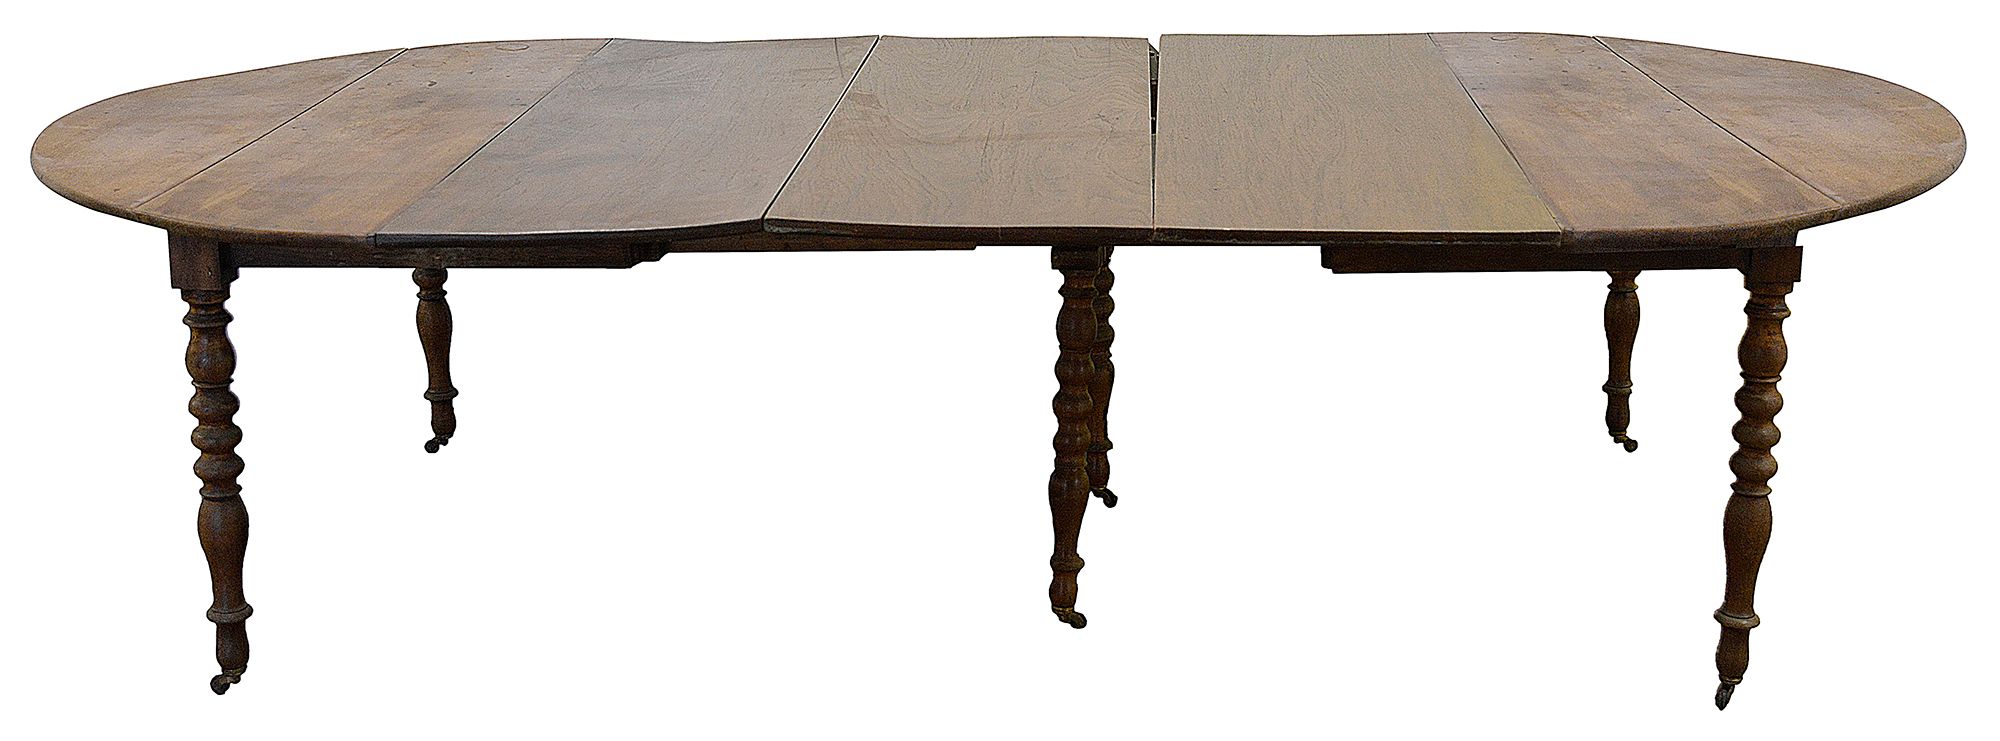 A French Provincial walnut extending dining table